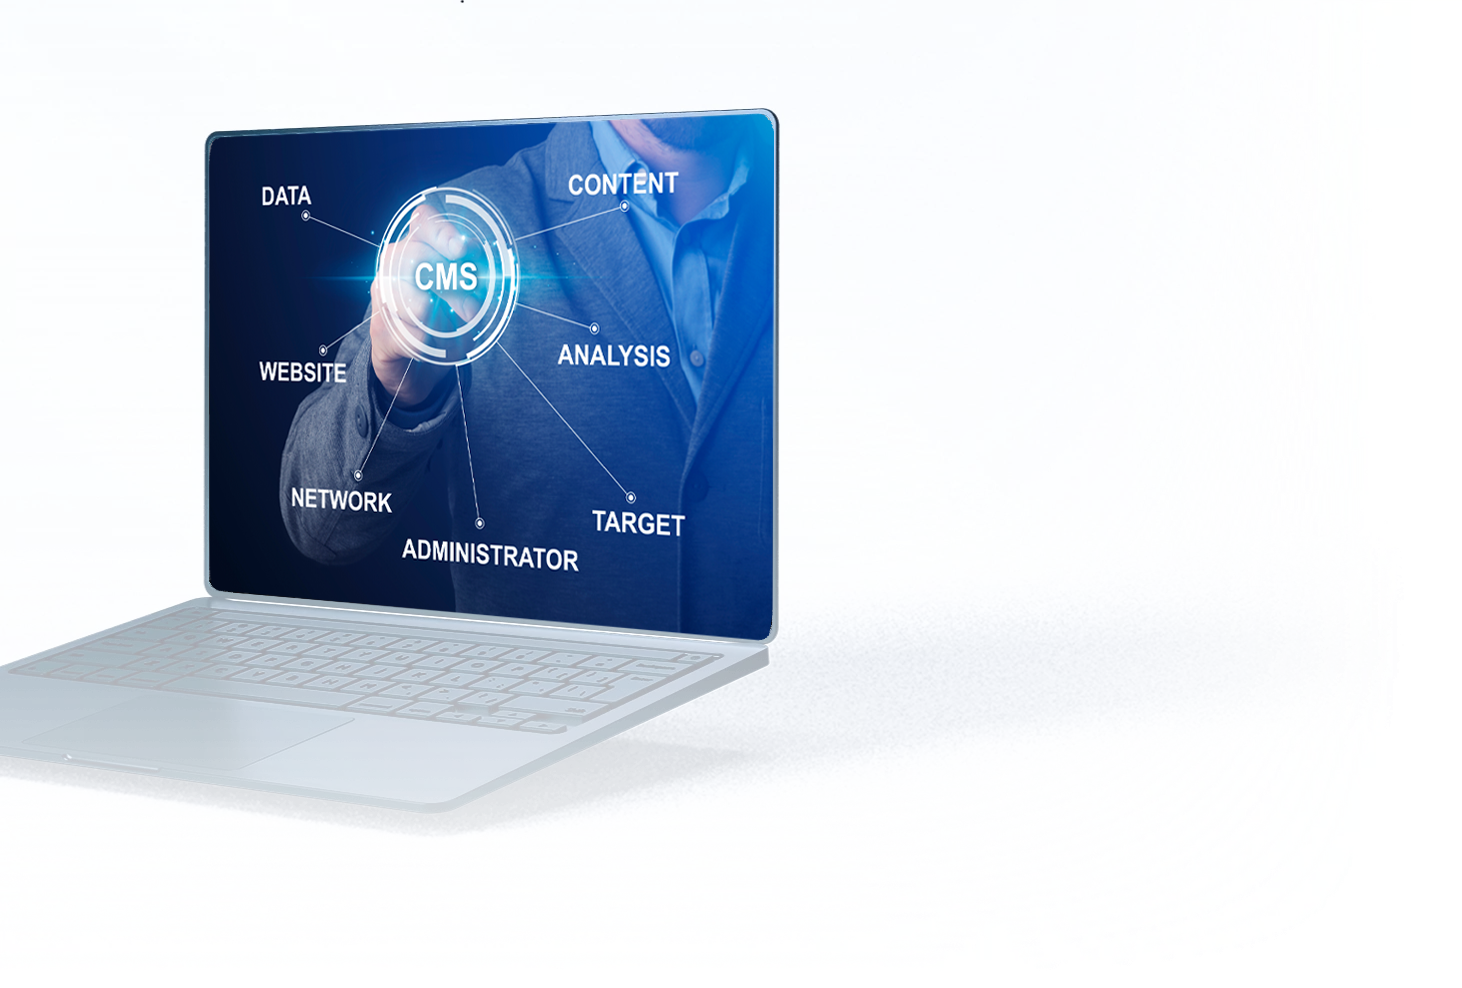 there is a laptop that shows CMS and options that they are connected to it like website, network, target, and etc.